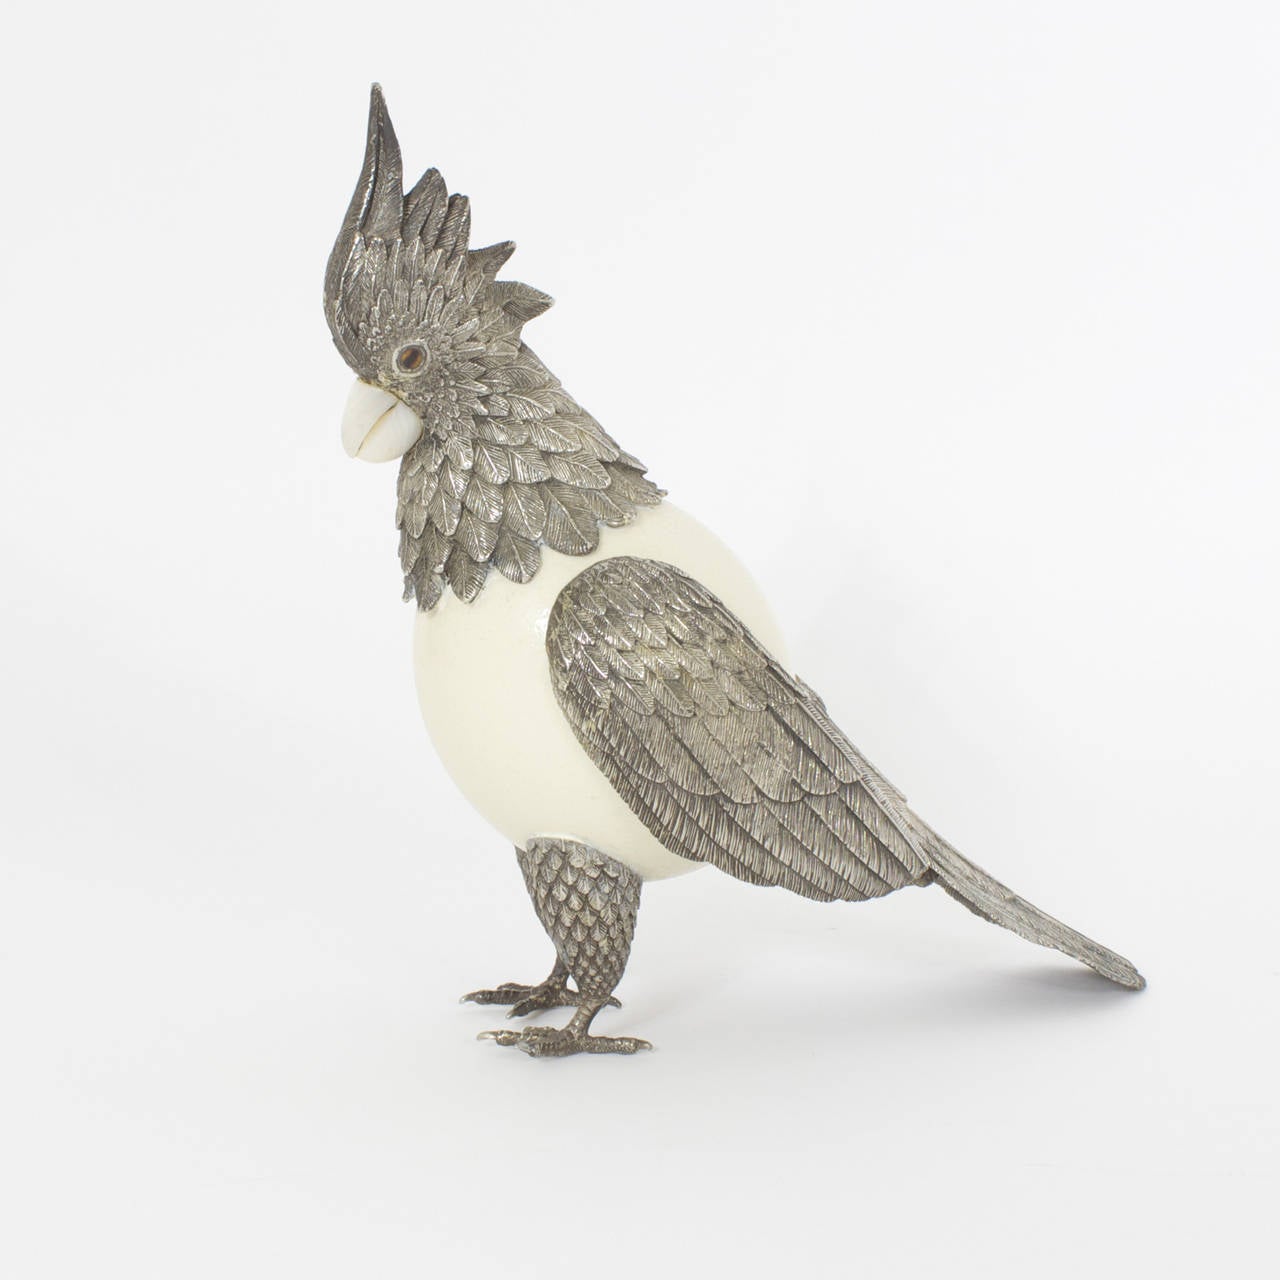 Whimsical mixed materials parrot or bird with an ostrich egg body and silvered metal feathers and feet, carved stone beak and over all sporting an air of confidence. In the manner of Binazzi.
A delightful addition to both modern or traditional